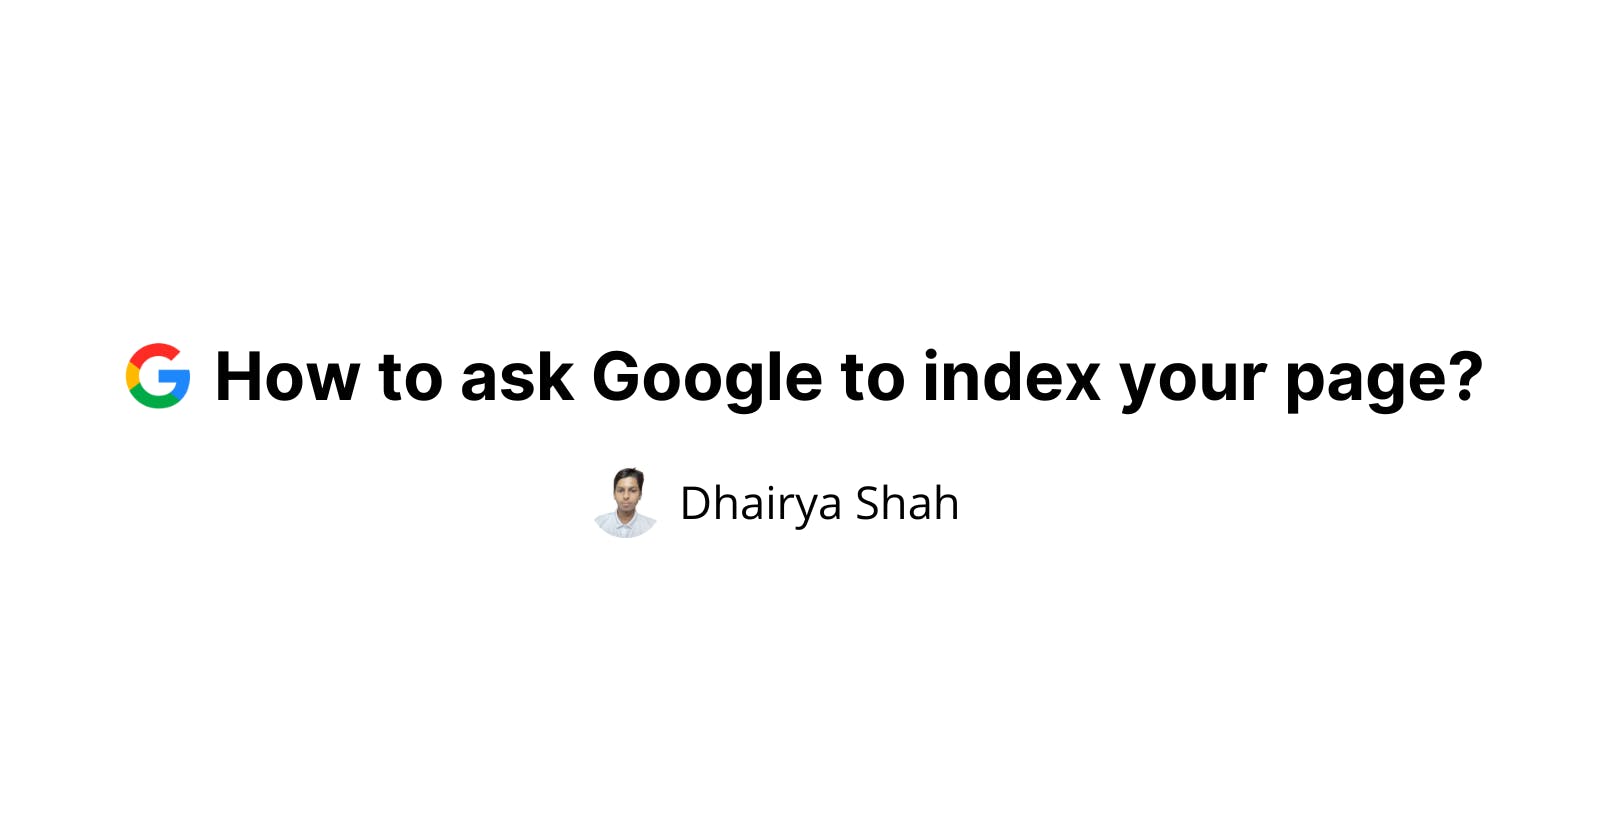 How to ask Google to index your page?